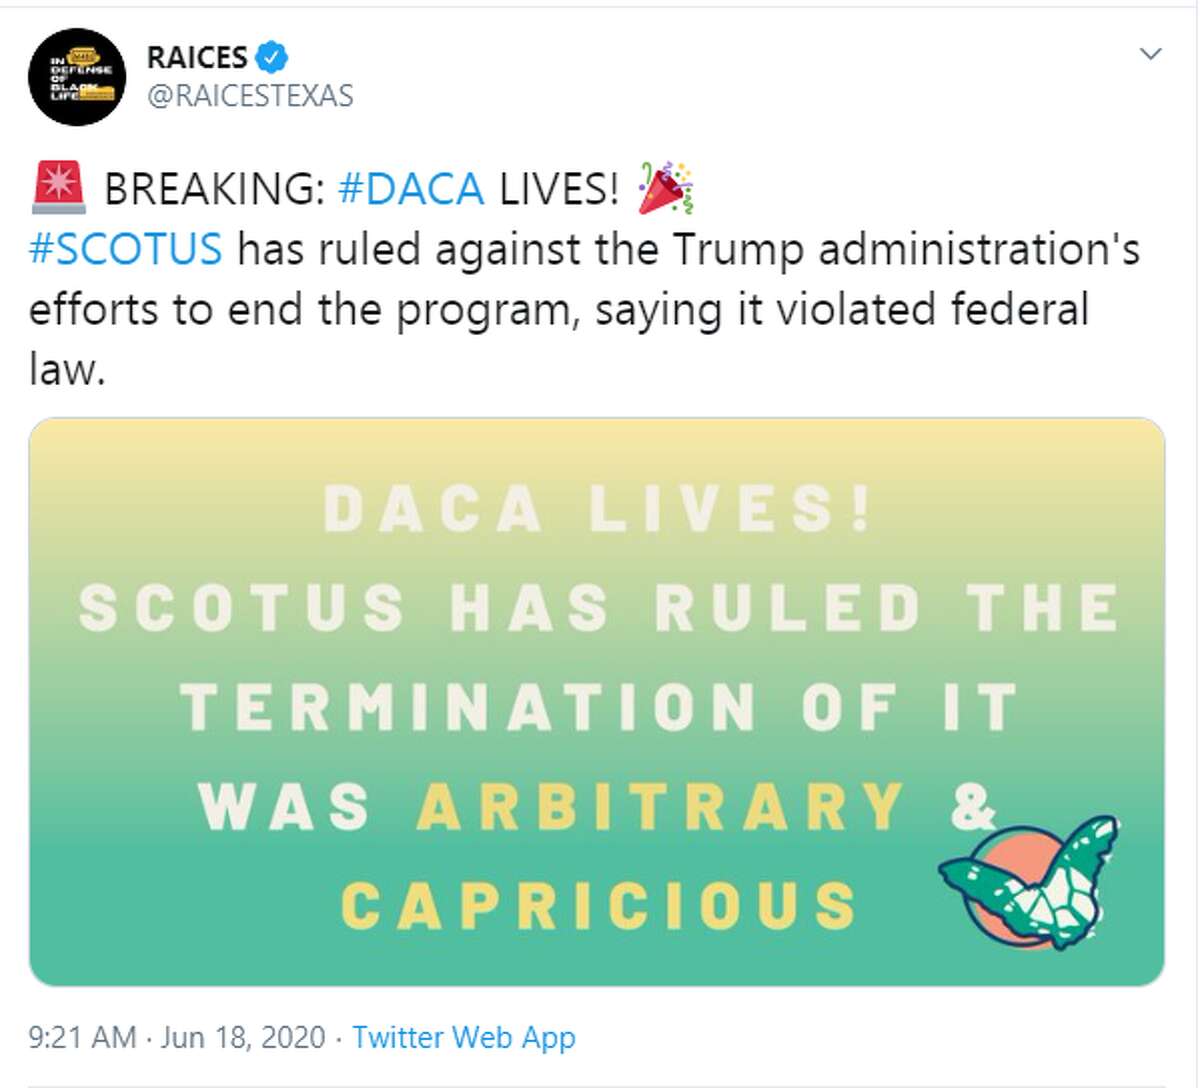 RAICES: BREAKING: #DACA LIVES! #SCOTUS has ruled against the Trump administration's efforts to end the program, saying it violated federal law.